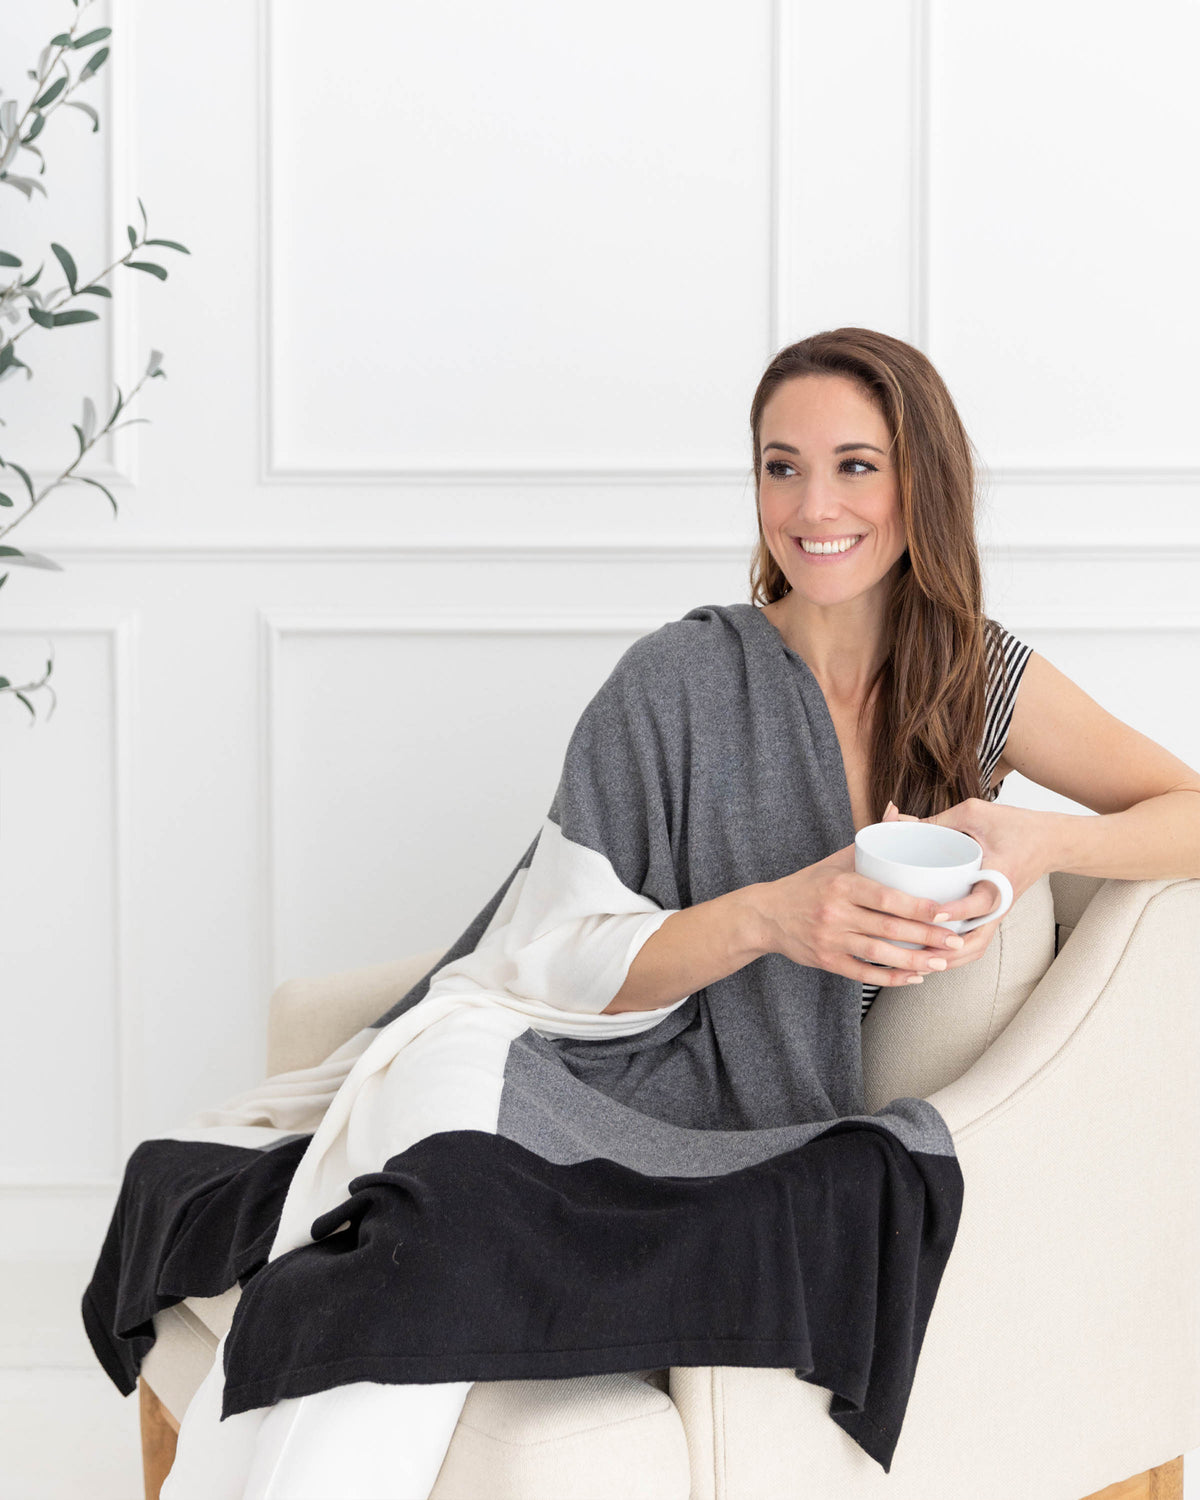 Woman wearing the Dreamsoft Travel Scarf in Gray Colorblock which is a black, gray and cream scarf, sitting on a chair while drinking coffee and smiling